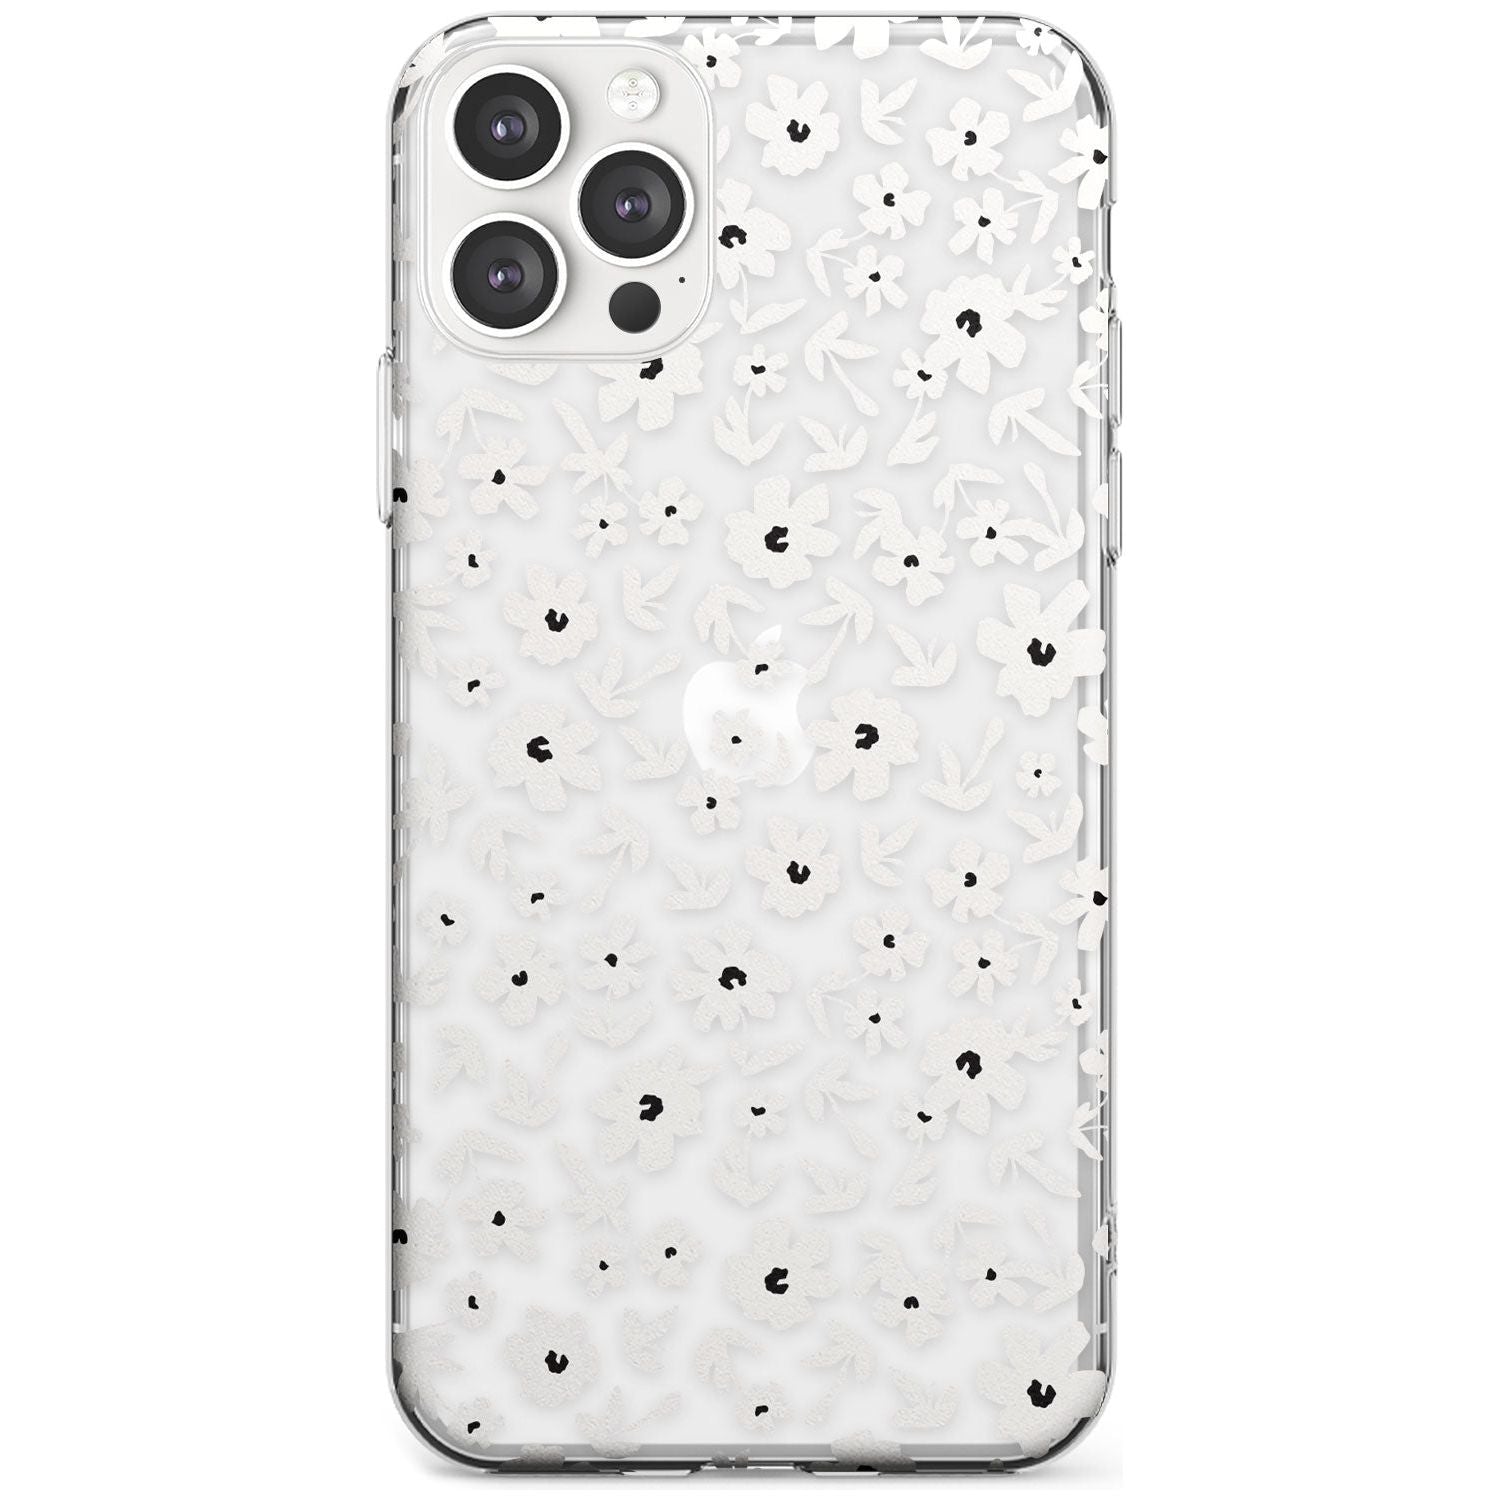 Floral Print on Clear - Cute Floral Design Black Impact Phone Case for iPhone 11 Pro Max